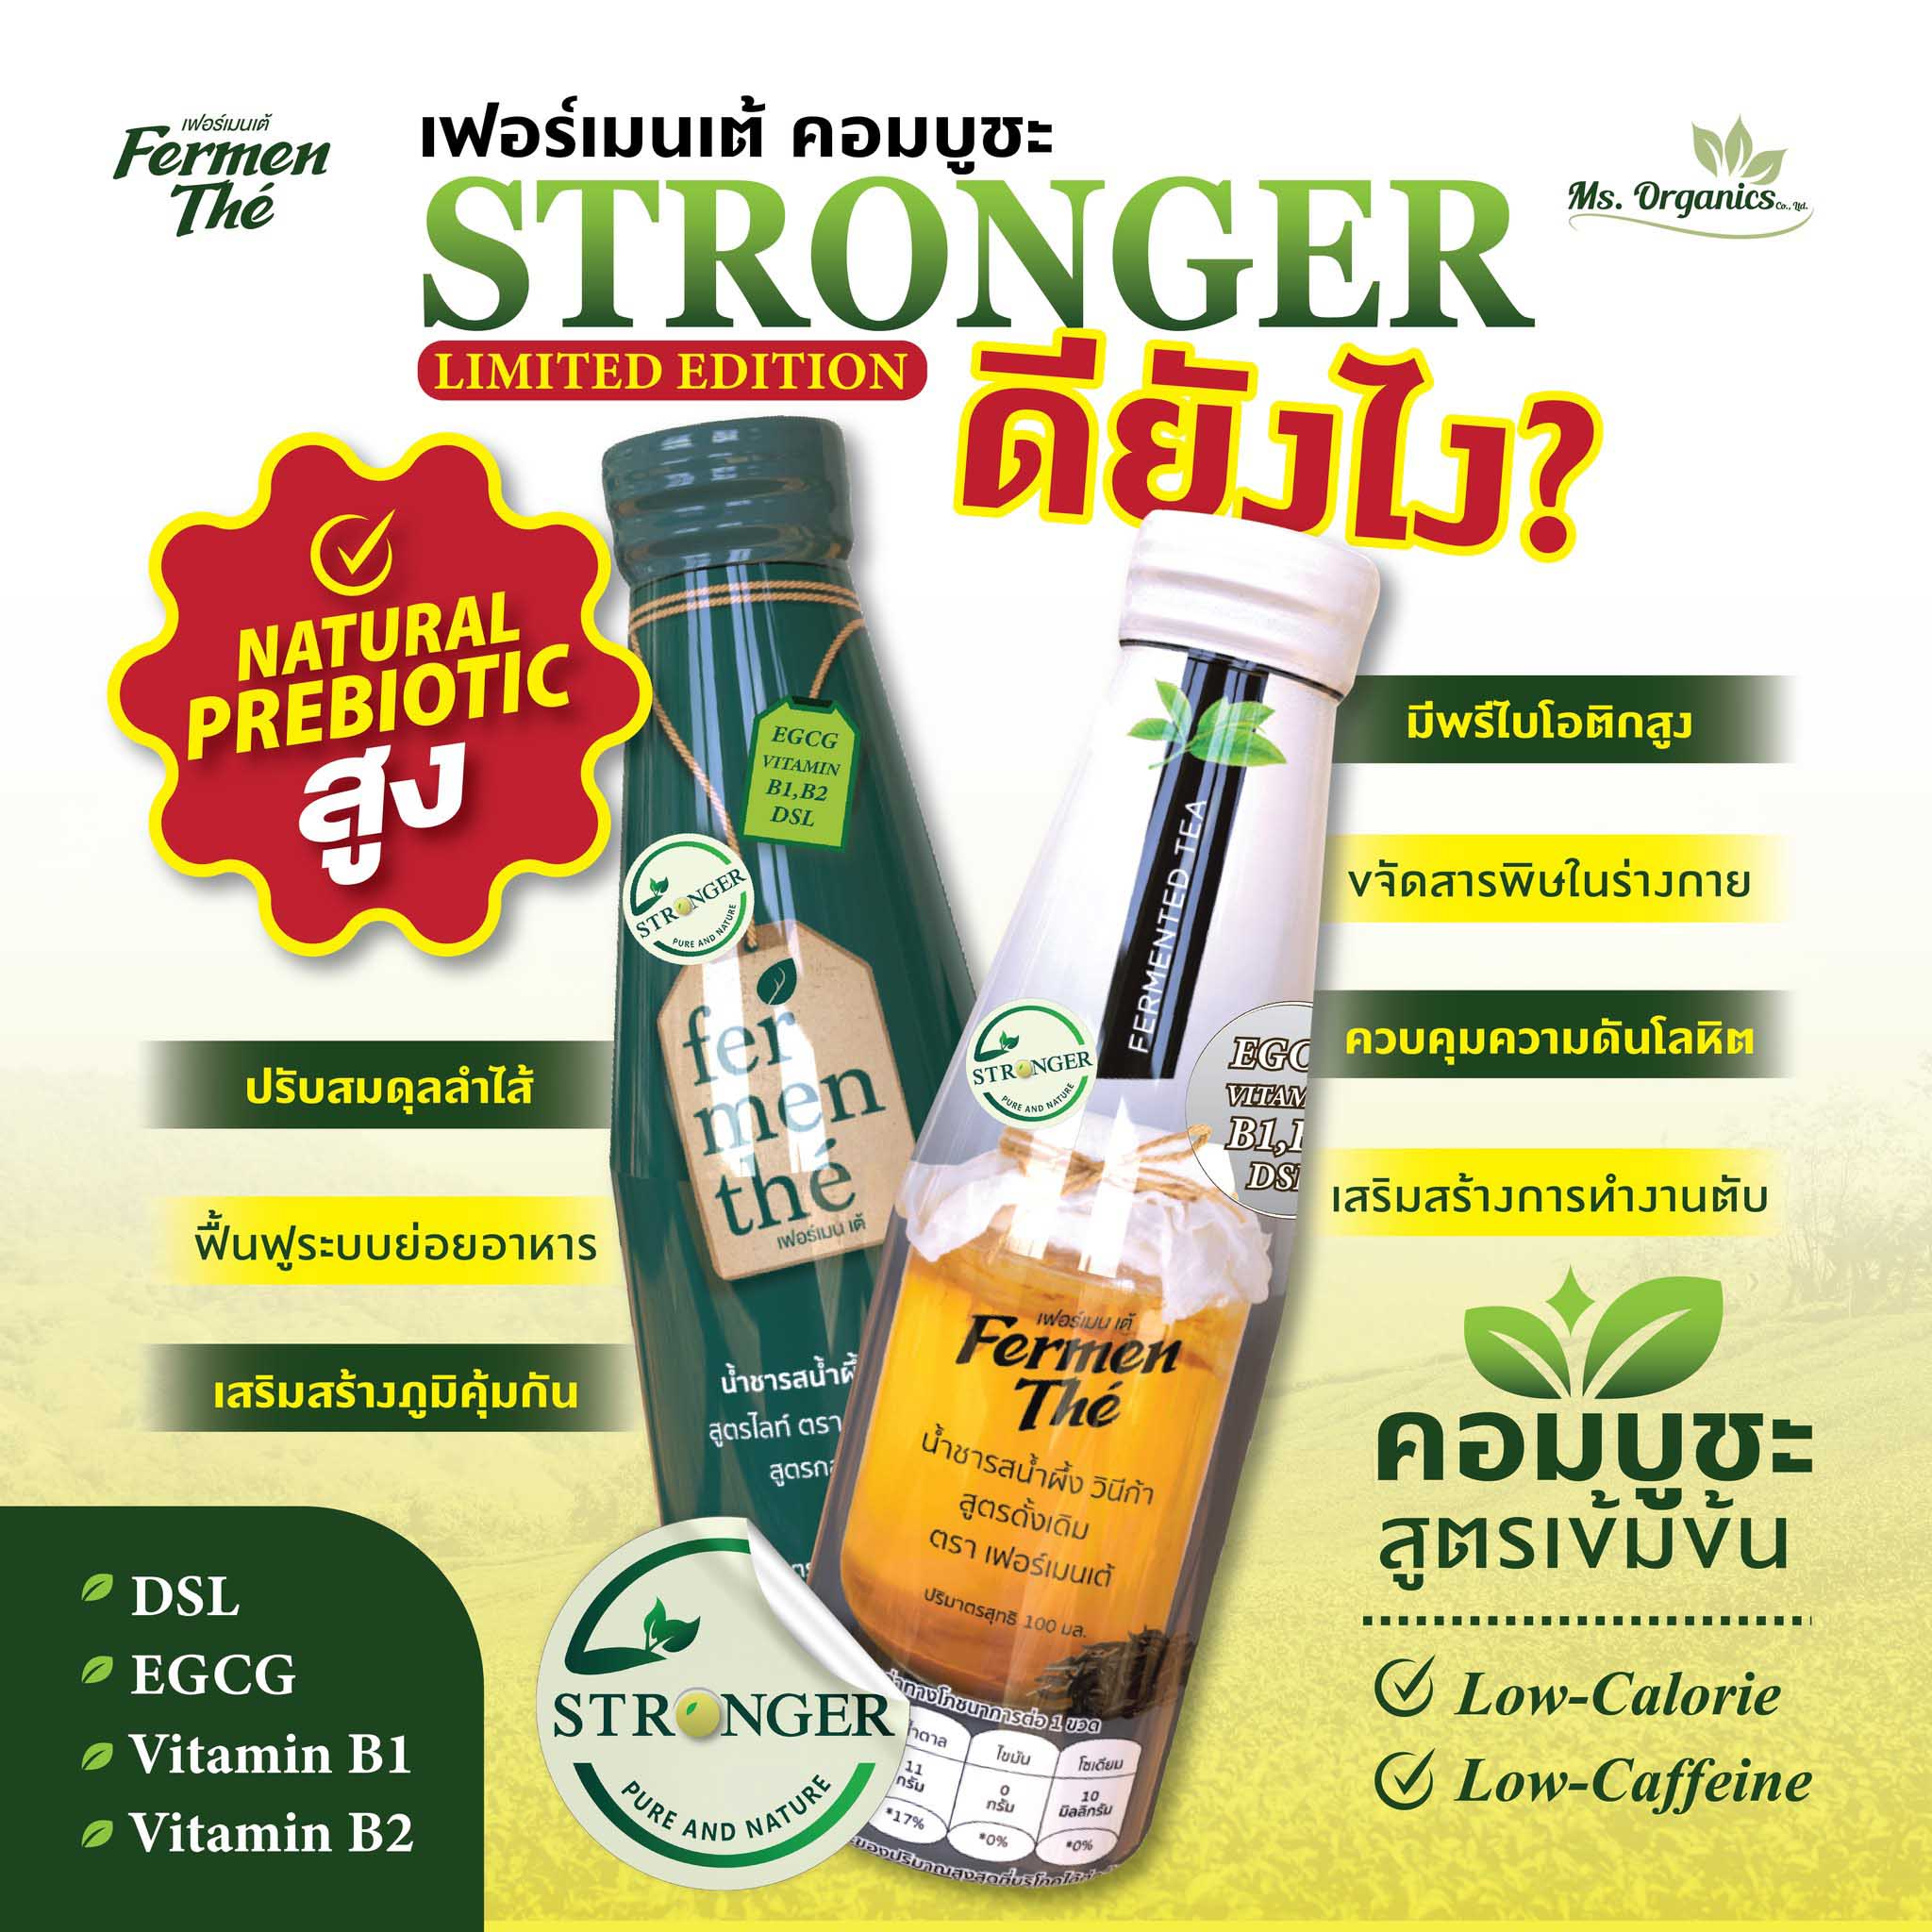 Fermenthe Stronger (Limited Edition) 1 กล่อง